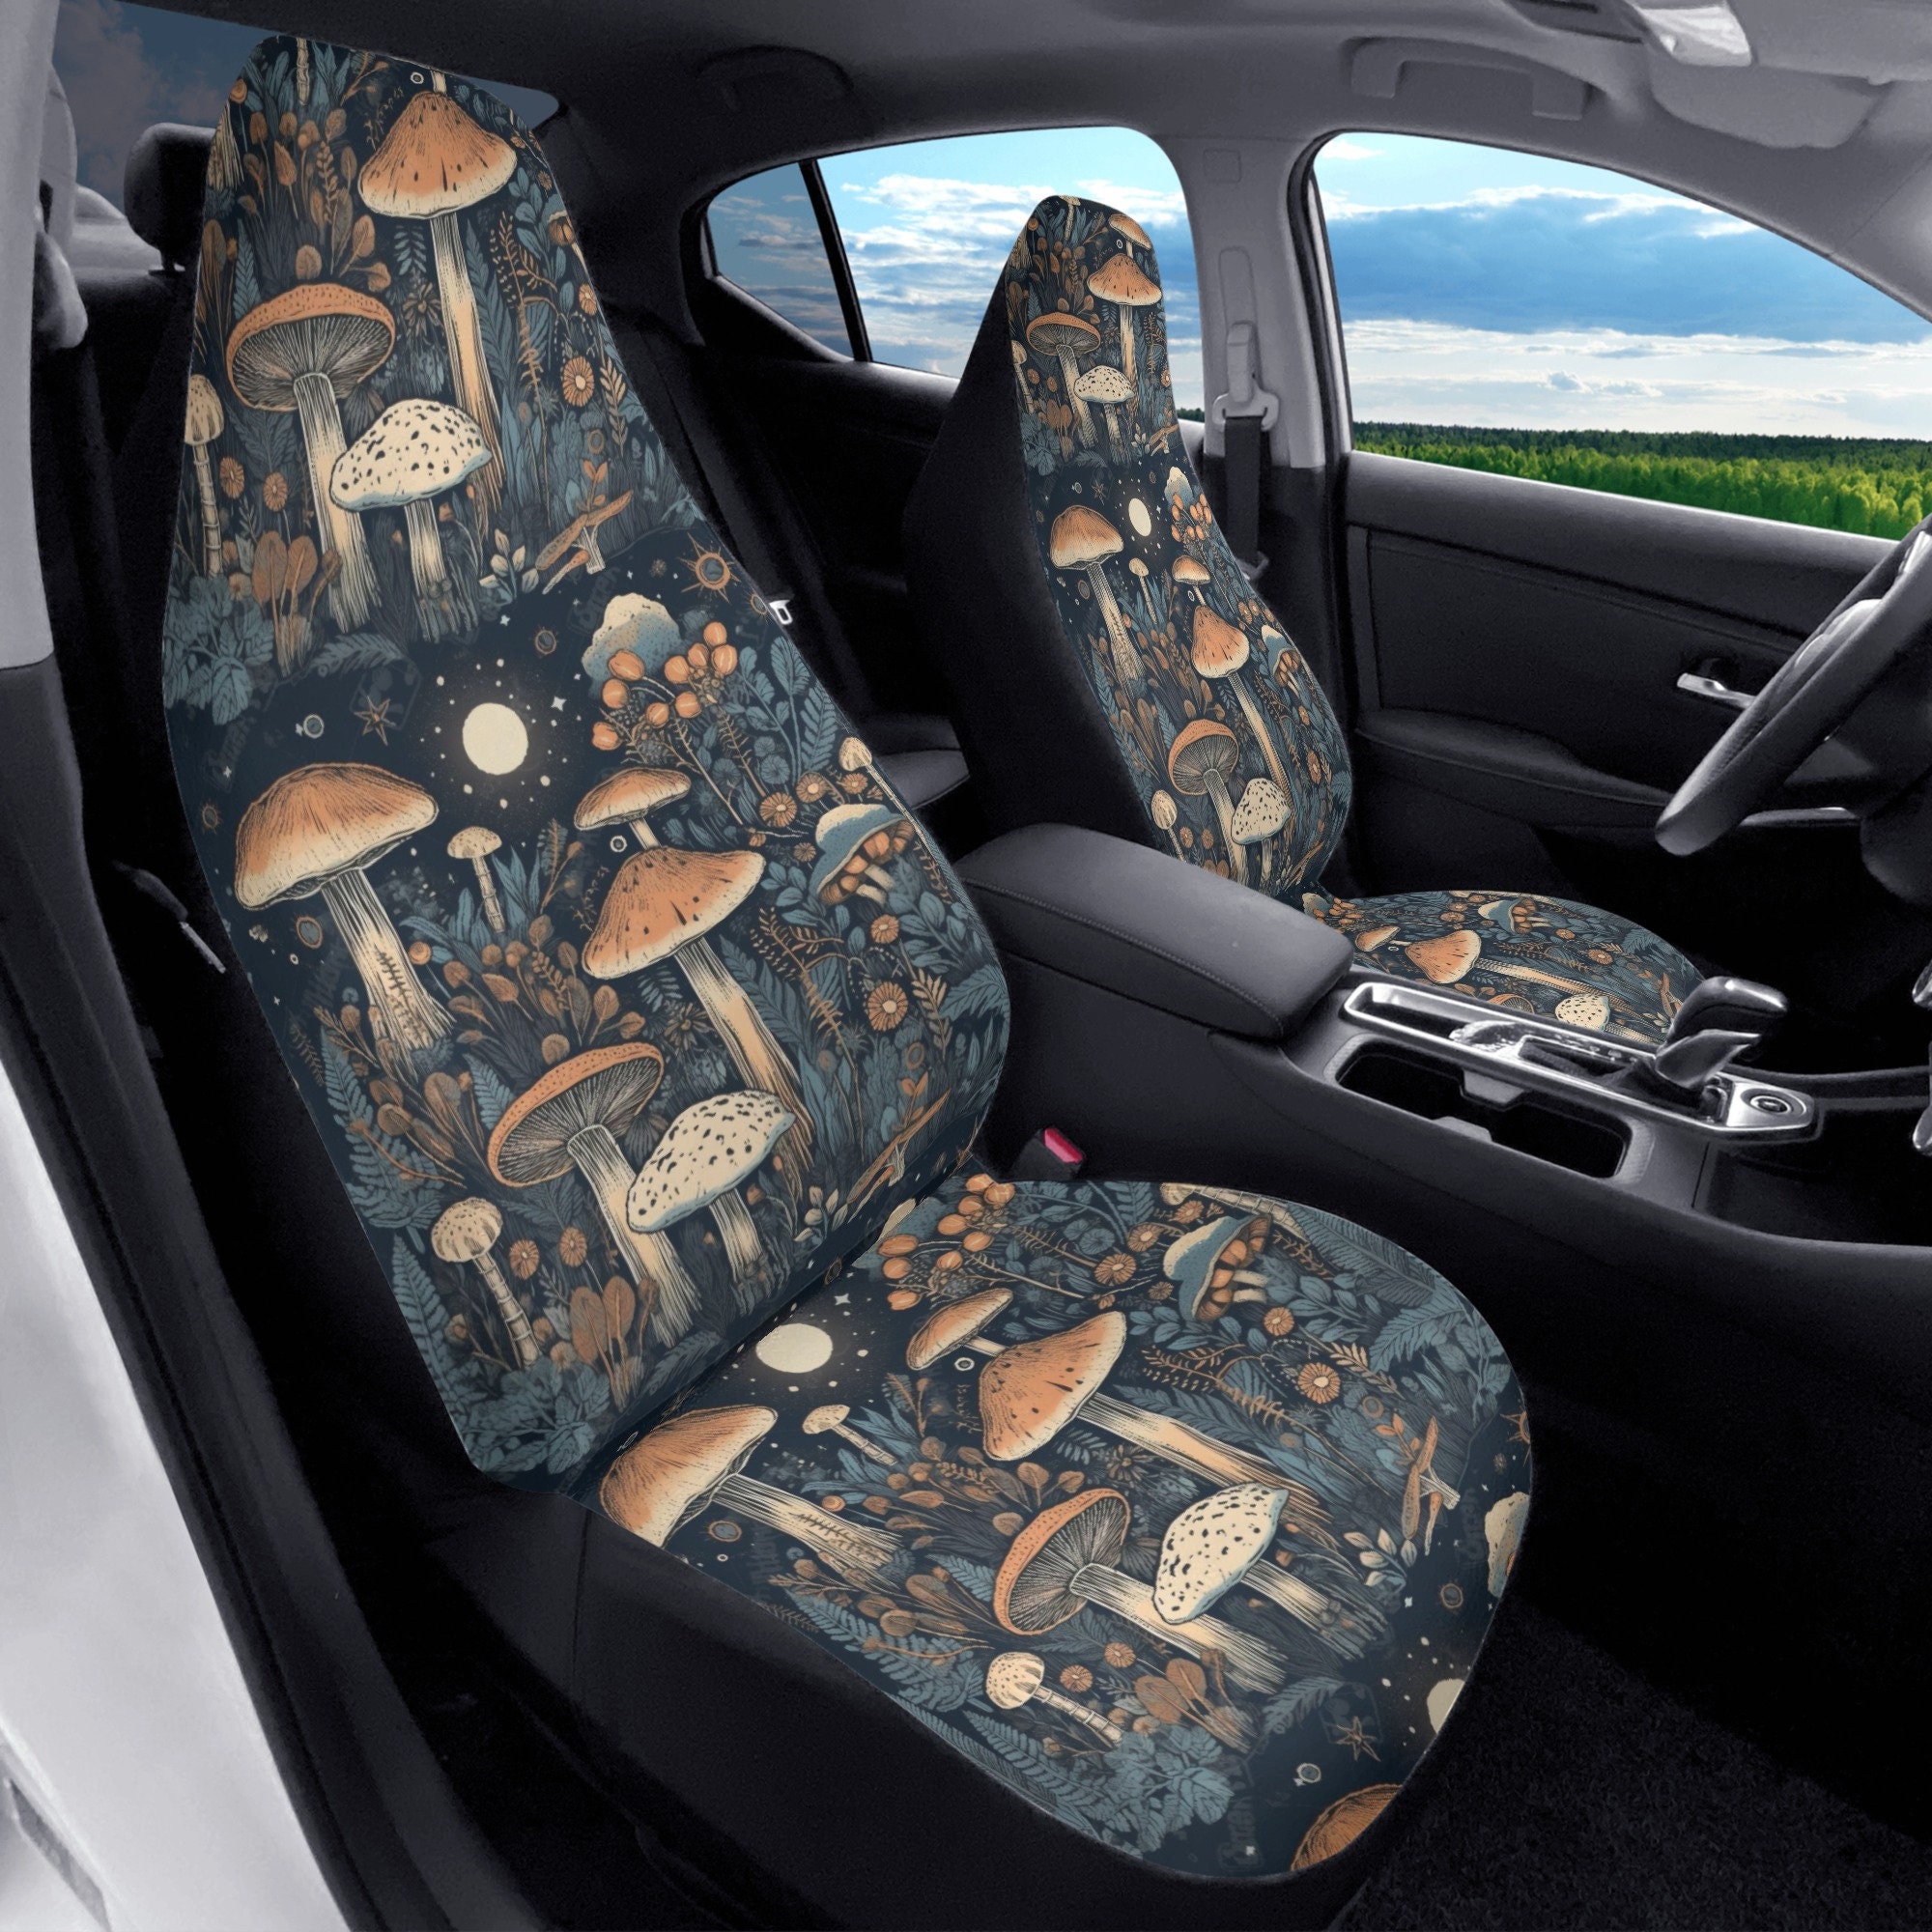 Boho Witchy Dark Cottagecore Car Seat Covers, Cute Magic Mushroom Forest Car  Seat Covers for Vehicle, Car Interior Decor, Car Accessories 